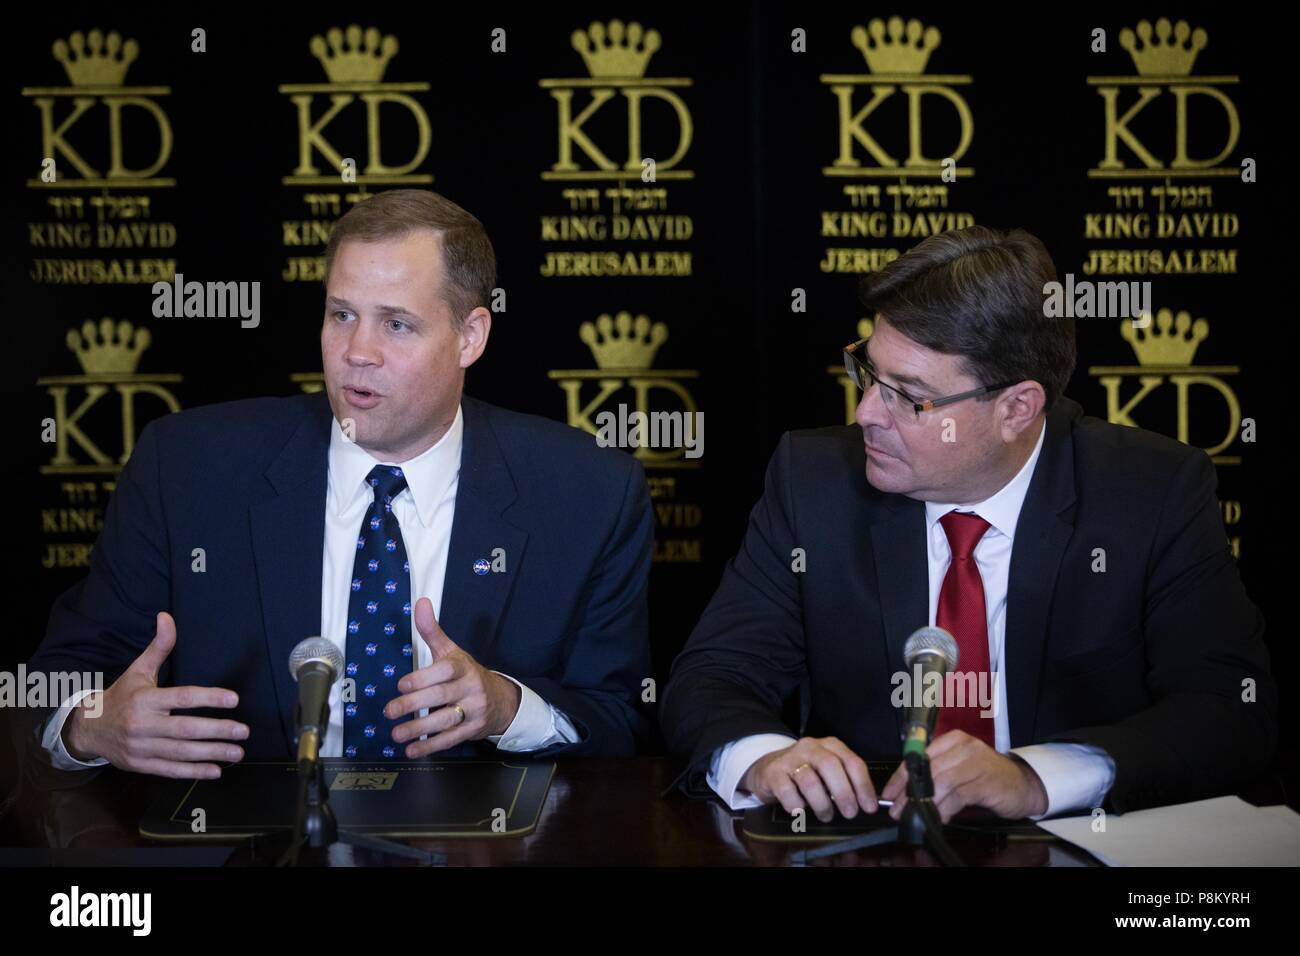 Jerusalem, Technology and Space Ofir Akunis (R) and Administrator of the U.S. National Aeronautics and Space Administration (NASA) Jim Bridenstine attend a press conference in Jerusalem. 12th July, 2018. Israeli Minister of Science, Technology and Space Ofir Akunis (R) and Administrator of the U.S. National Aeronautics and Space Administration (NASA) Jim Bridenstine attend a press conference in Jerusalem, on July 12, 2018. According to an official joint statement issued on Thursday, NASA and the Israel Space Agency (ISA) will expand their cooperation. Credit: JINI/Xinhua/Alamy Live News Stock Photo